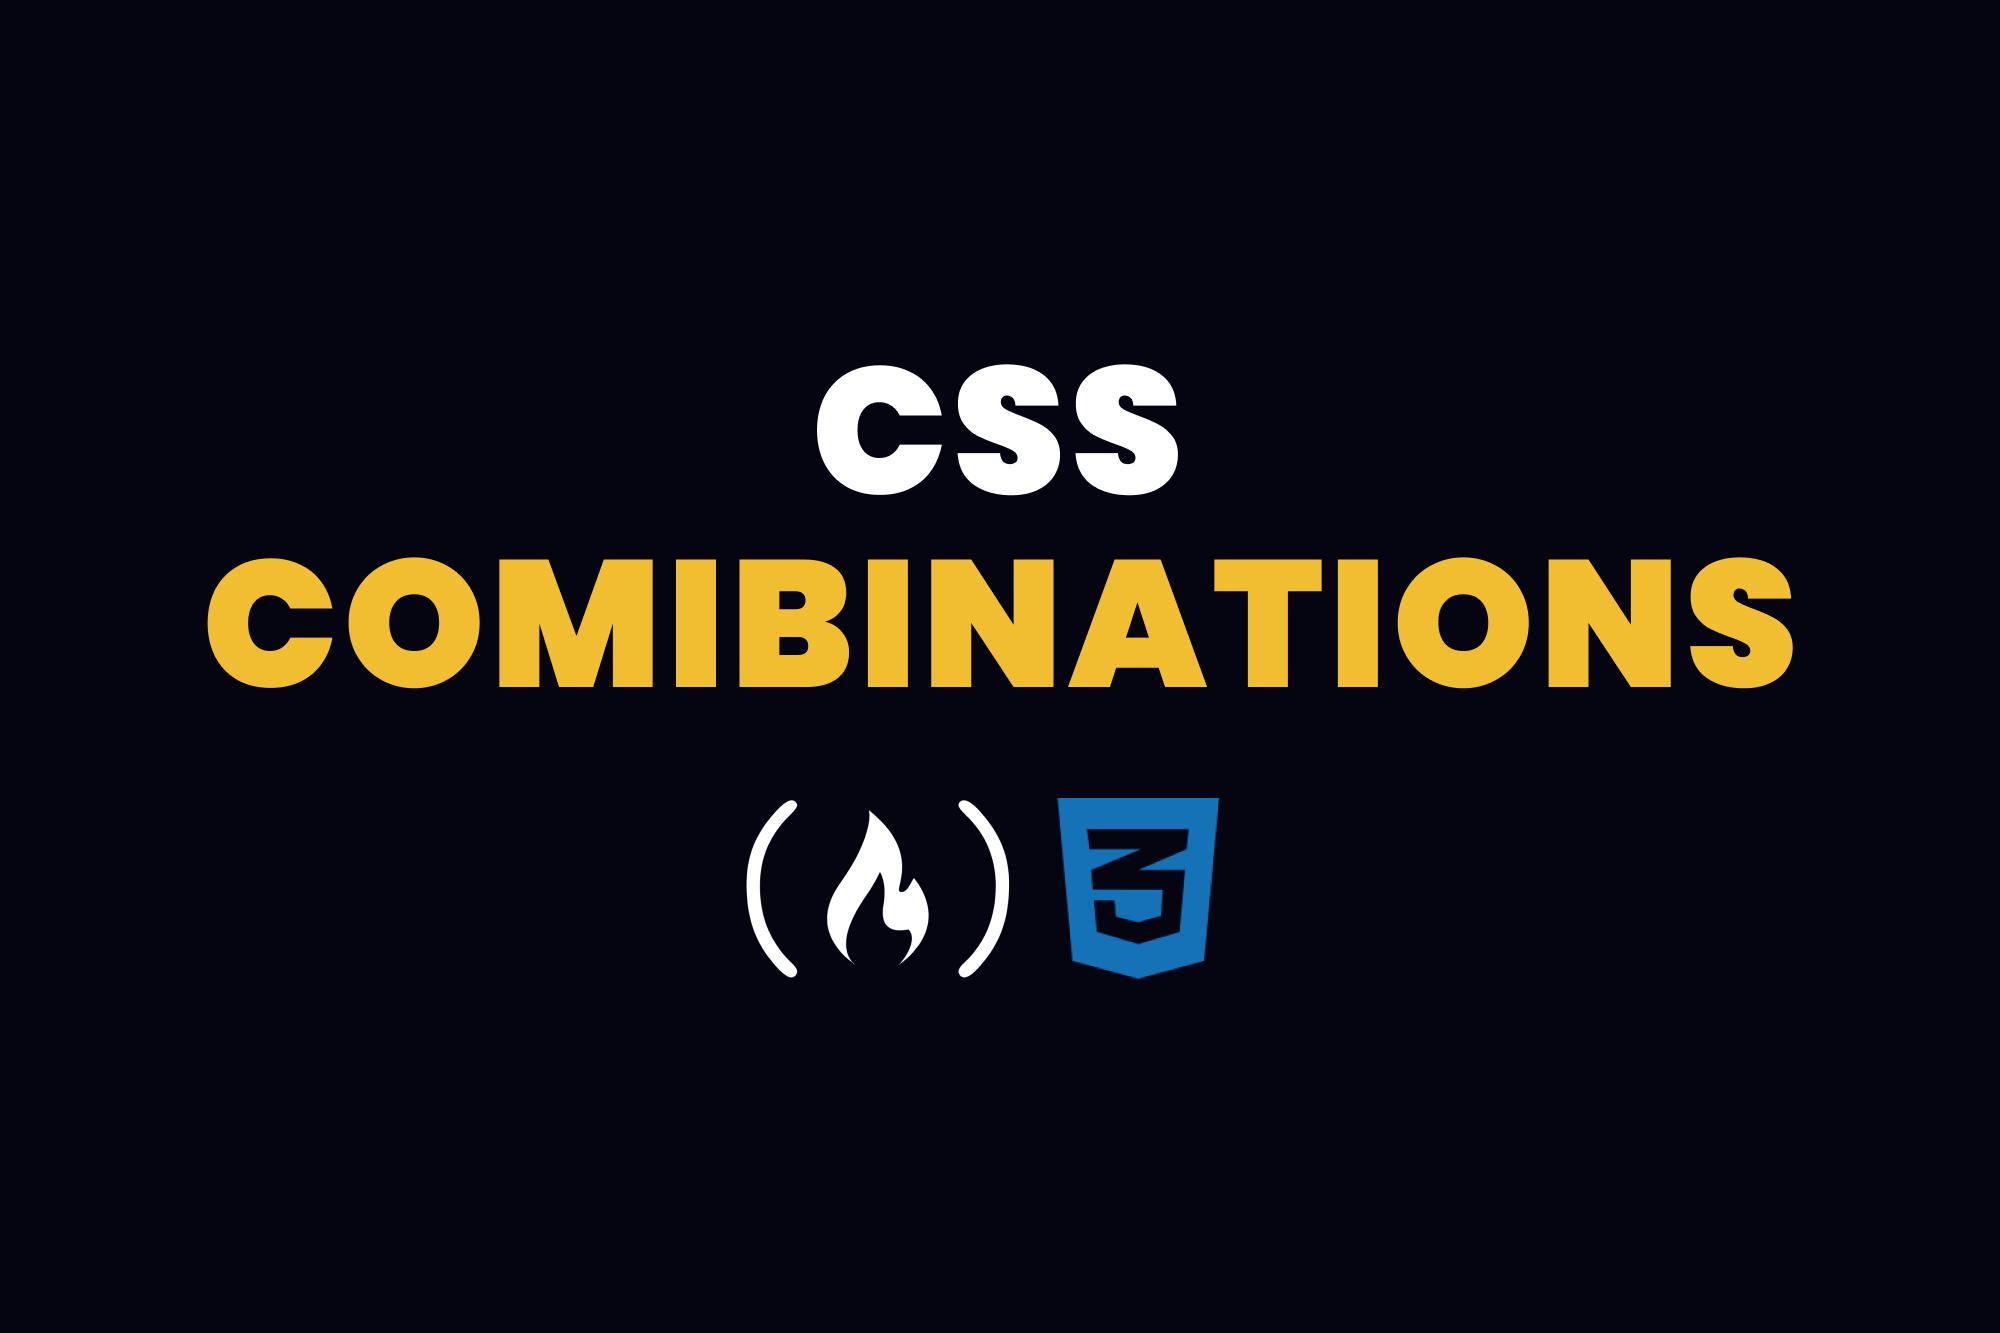 How to Use CSS Combinators to Select and Style Elements